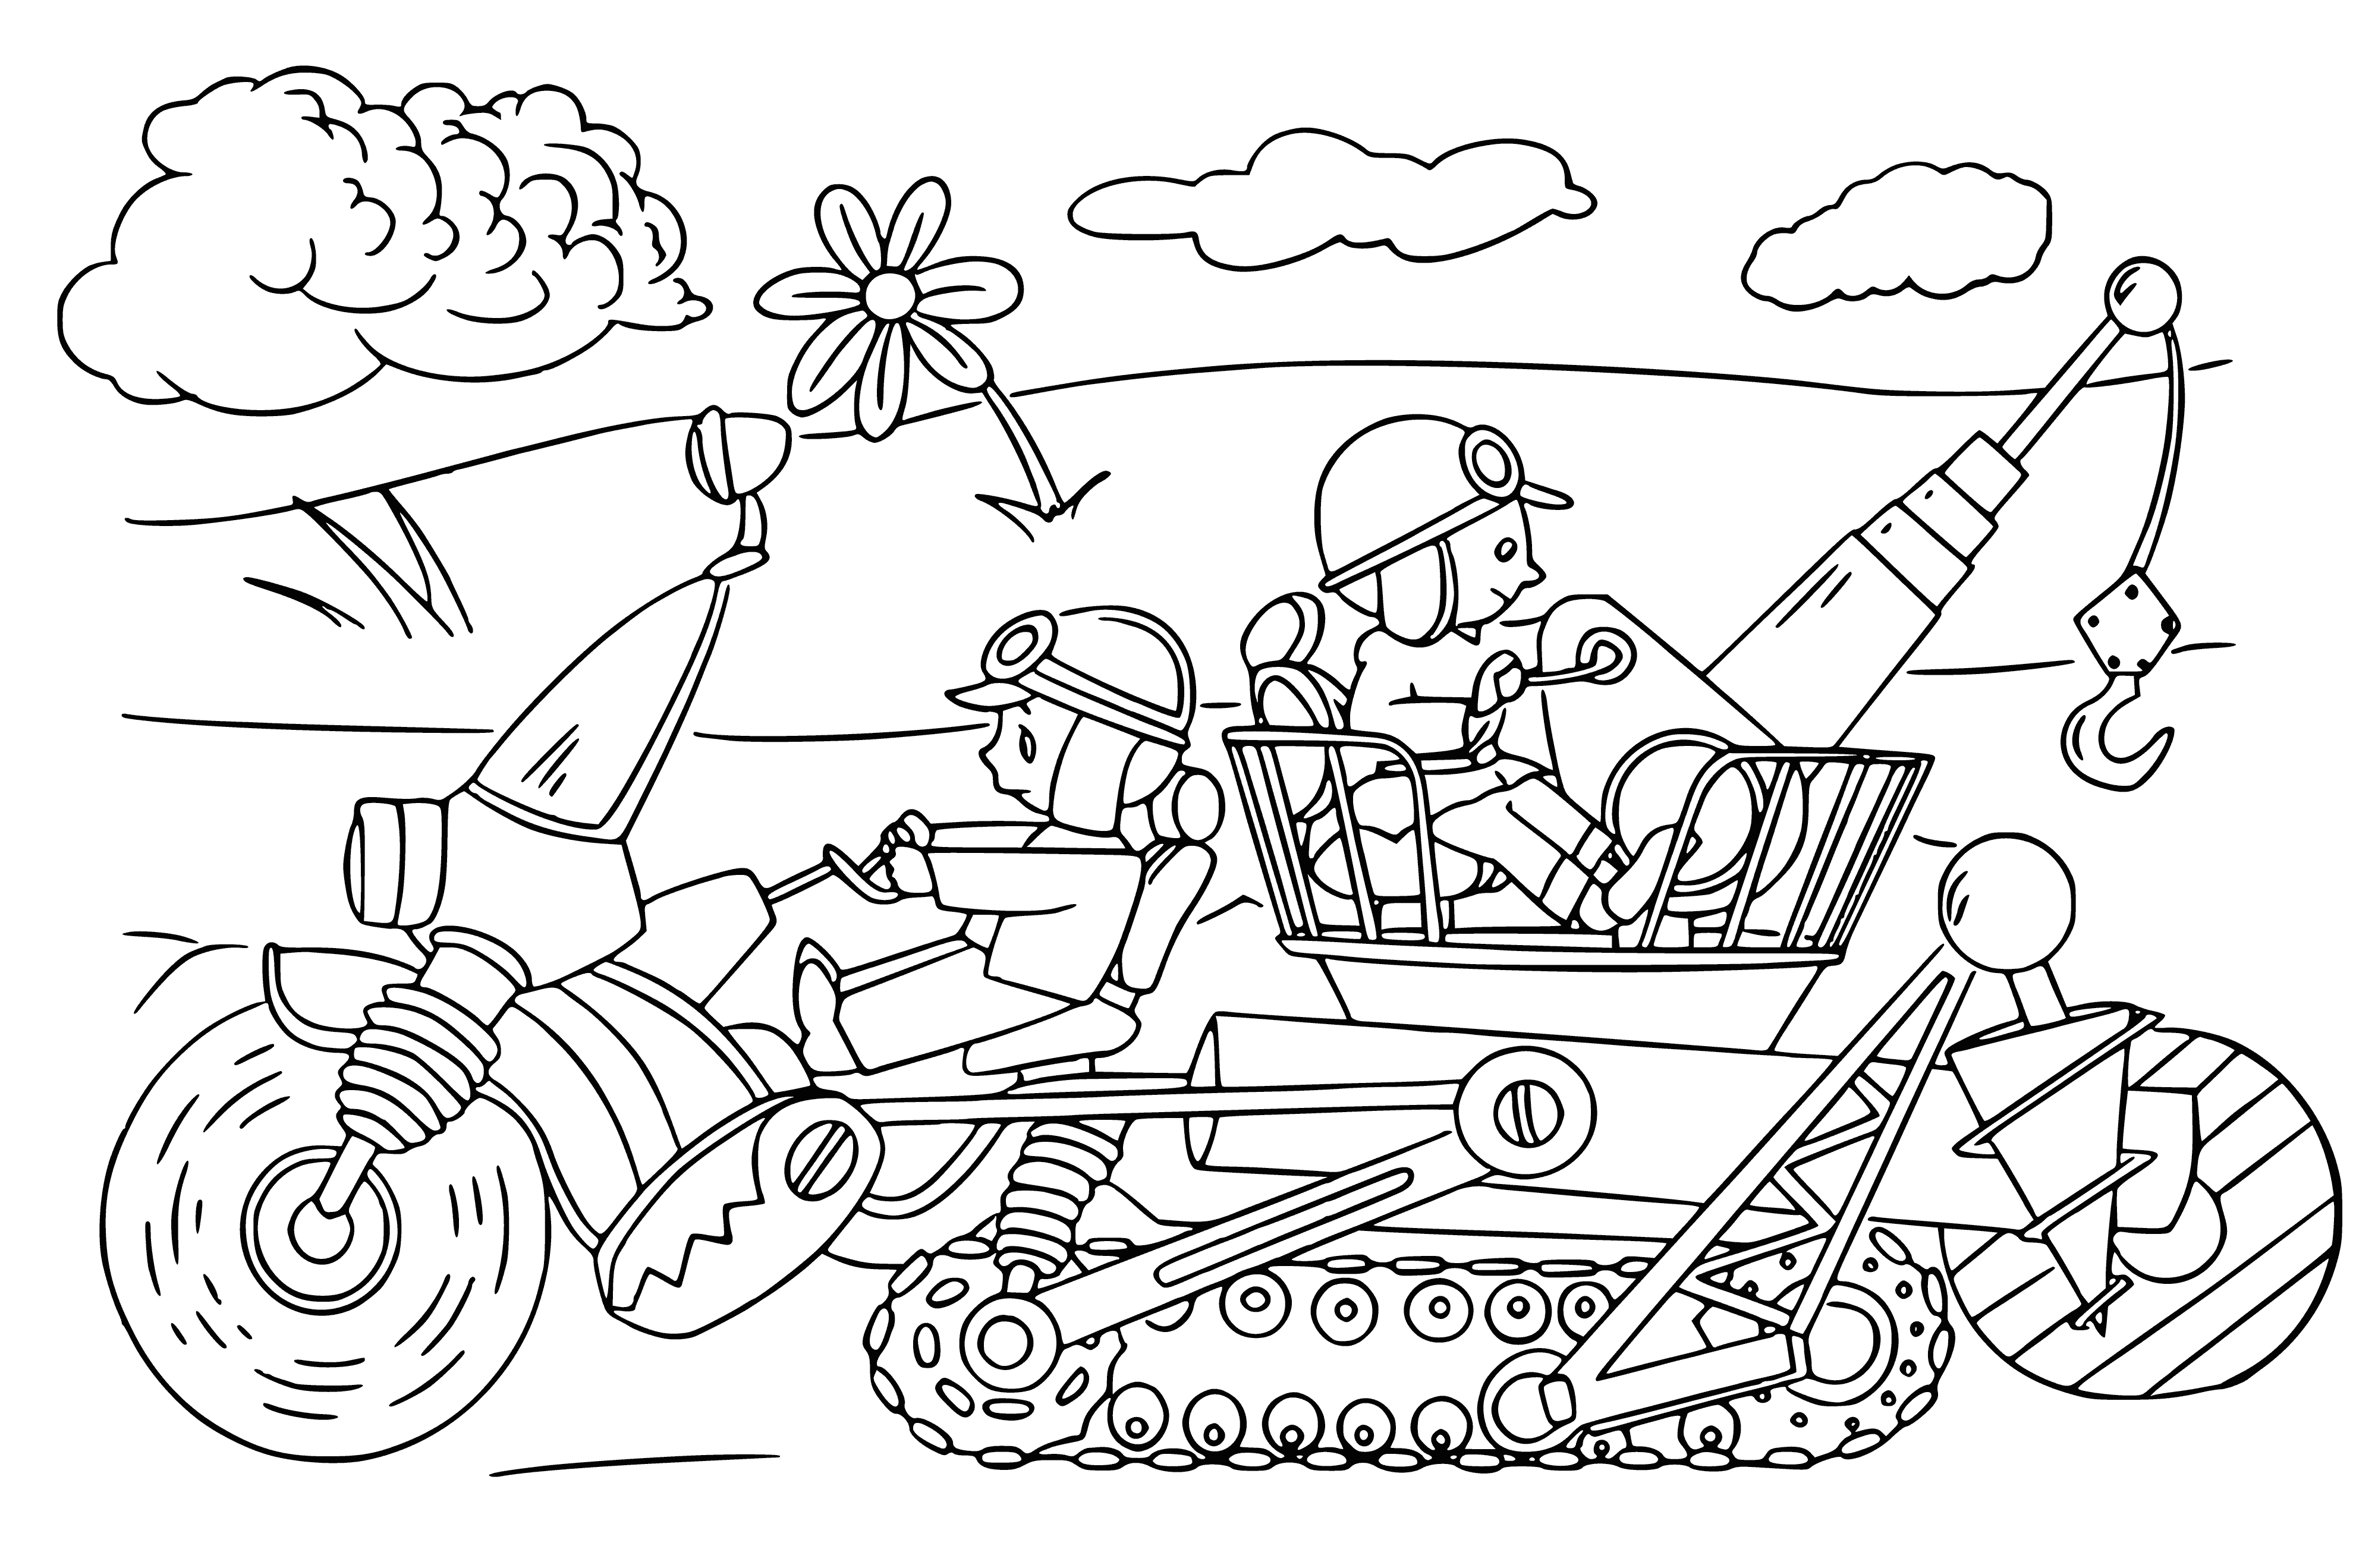 coloring page: A tower of screws and tongue depressors topped with a red-headed metal screw sits in view of a crescent moon.